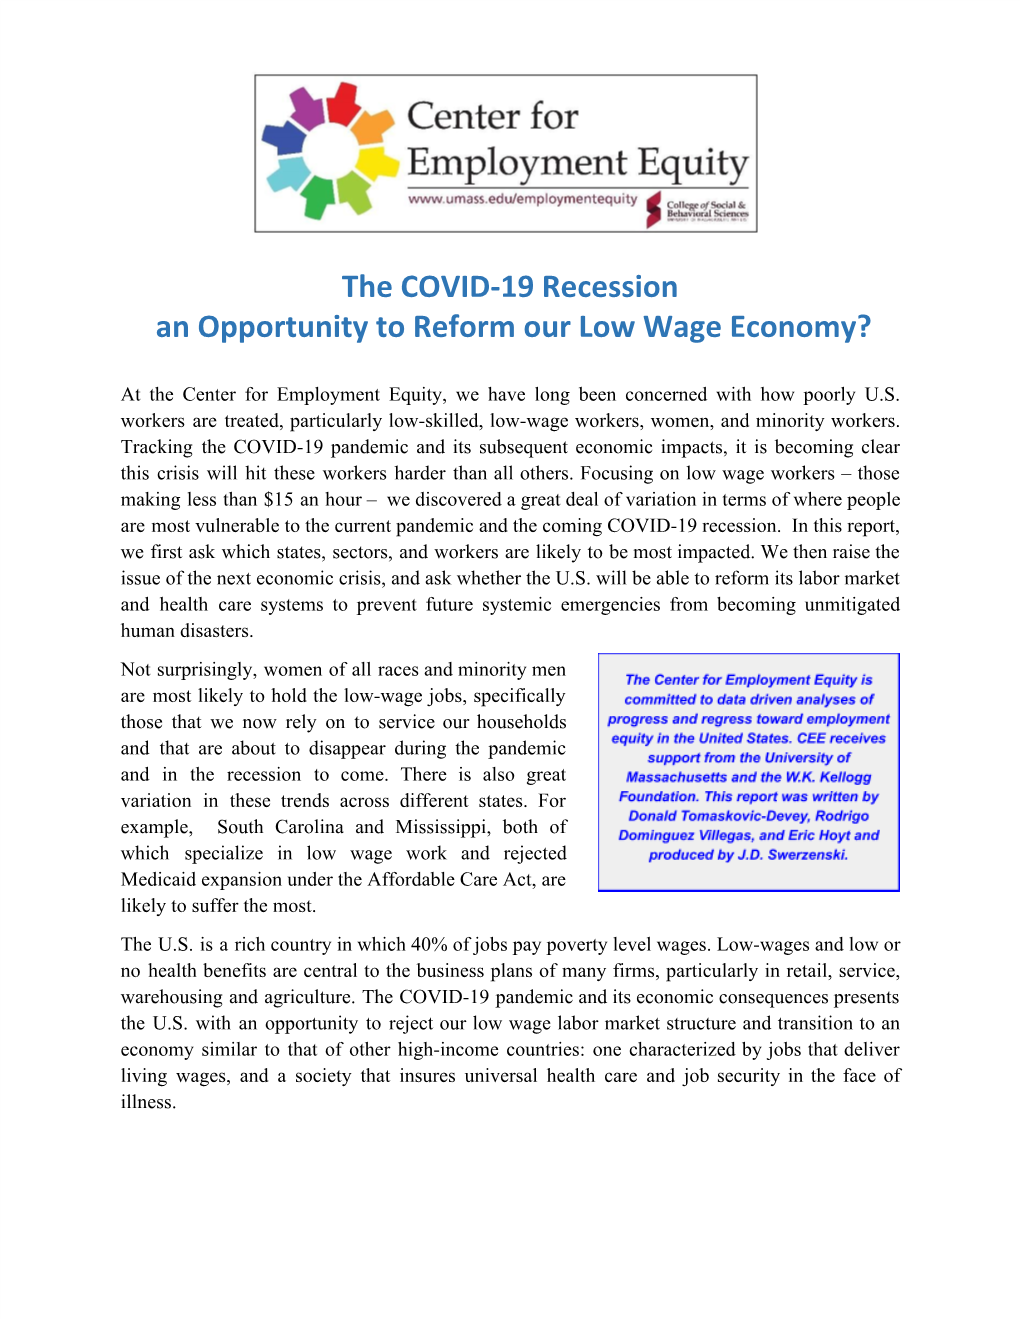 The COVID-19 Recession an Opportunity to Reform Our Low Wage Economy?